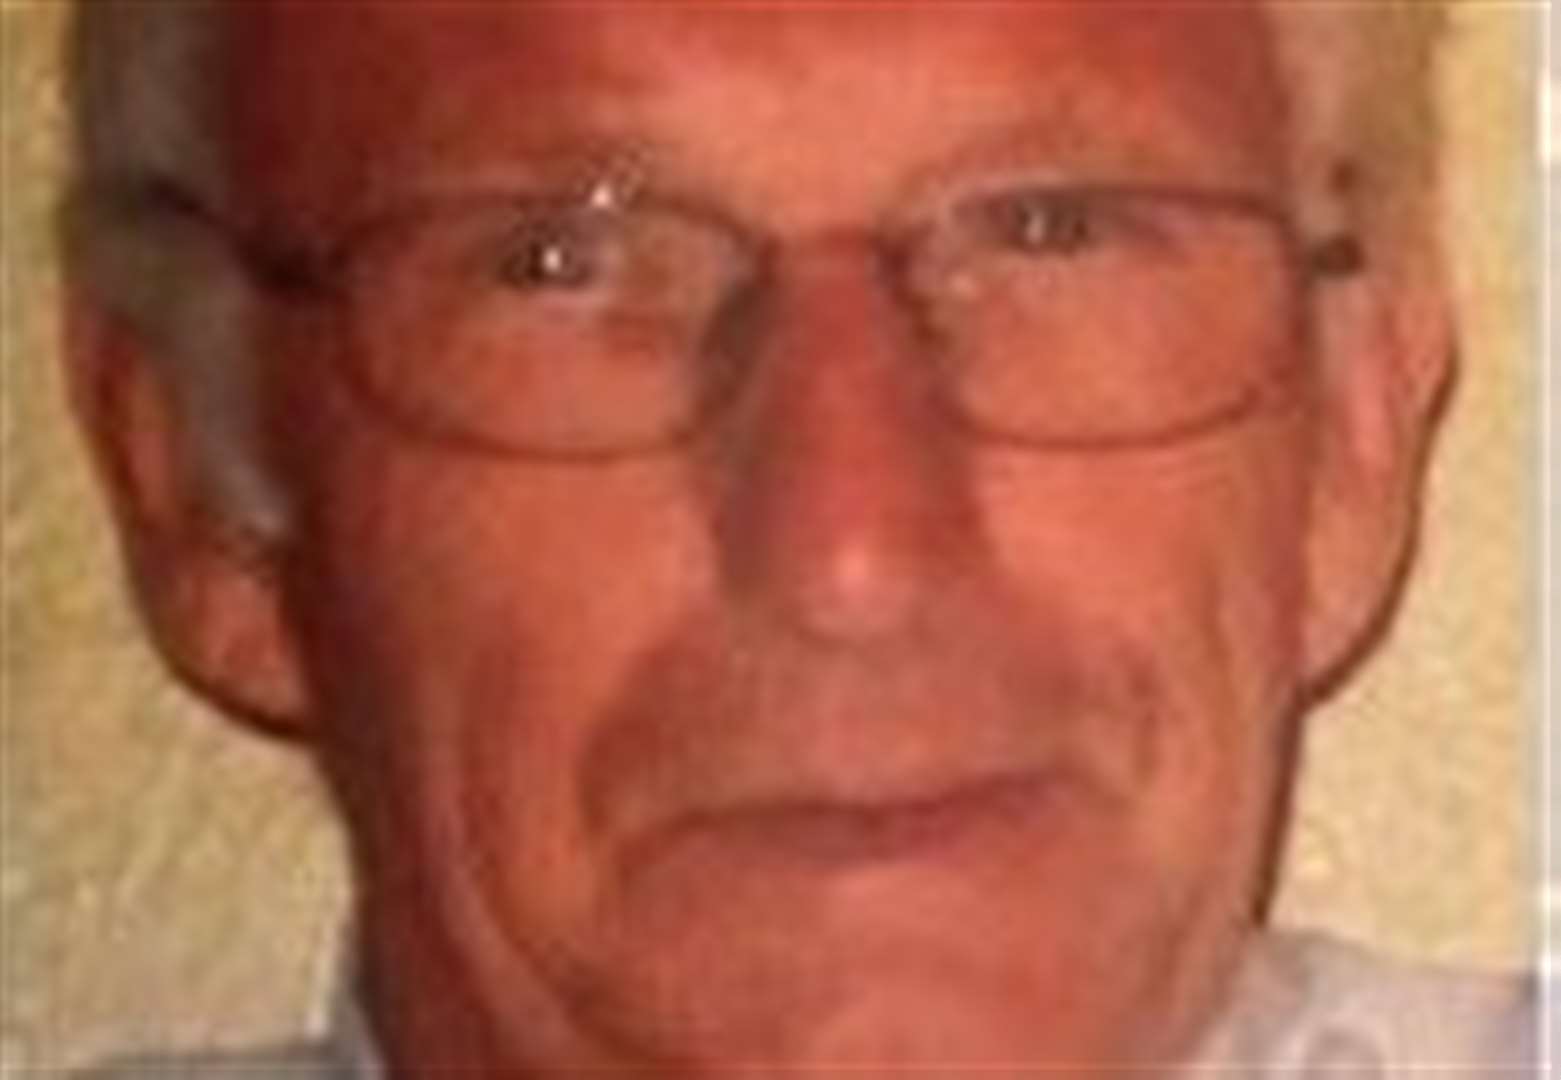 Relief as missing pensioner found